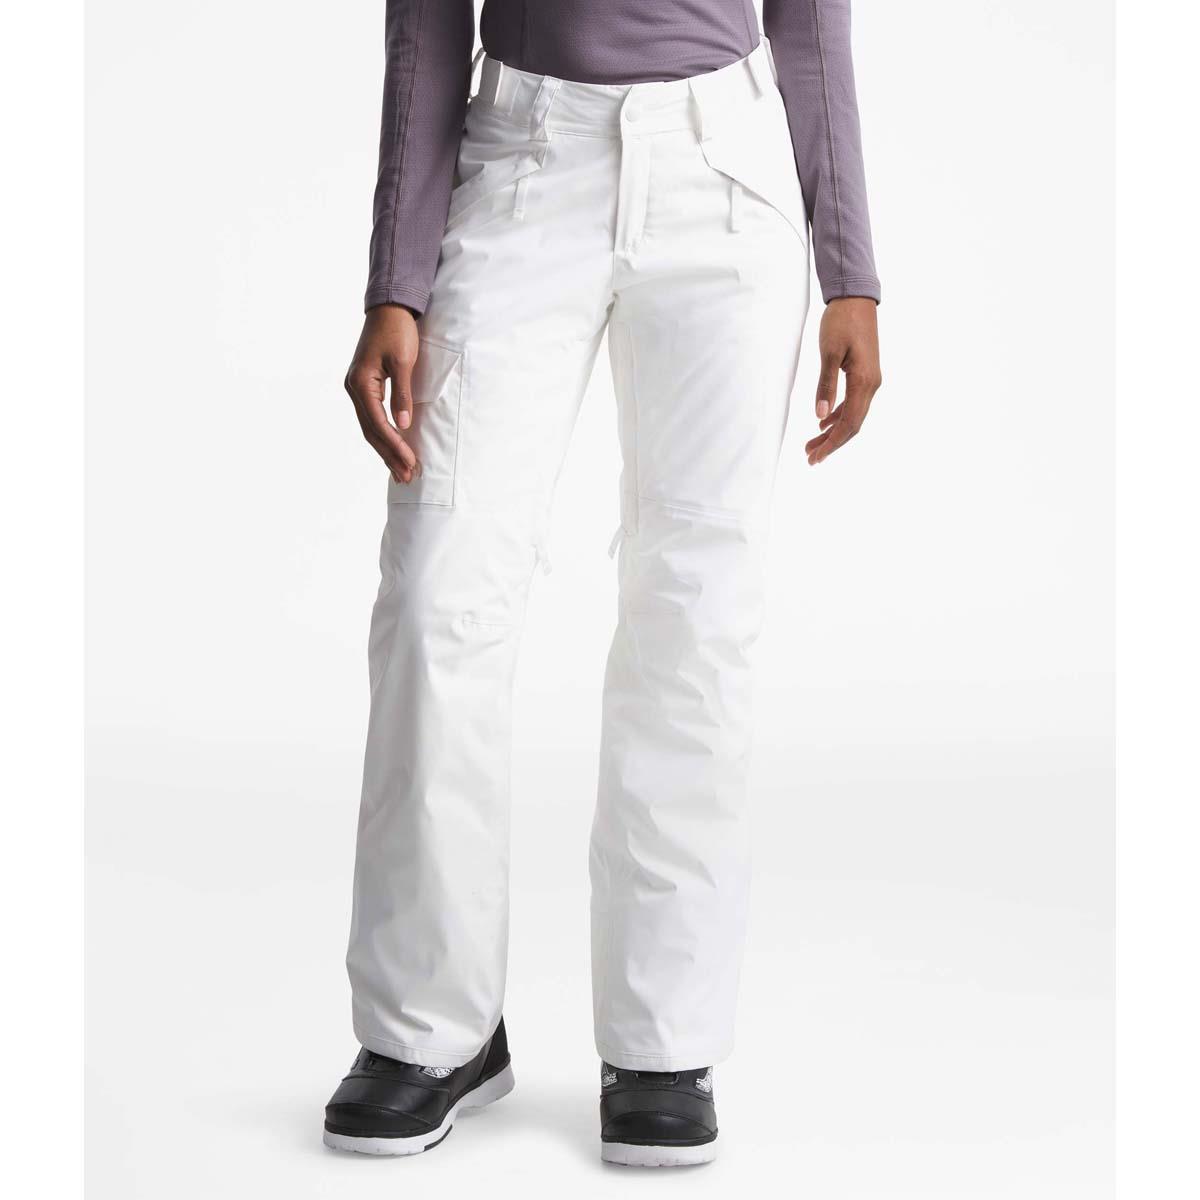 Overstijgen Champagne afvoer Women The North Face Freedom Insulated Pant - NF0A3M56 | Buckmans.com